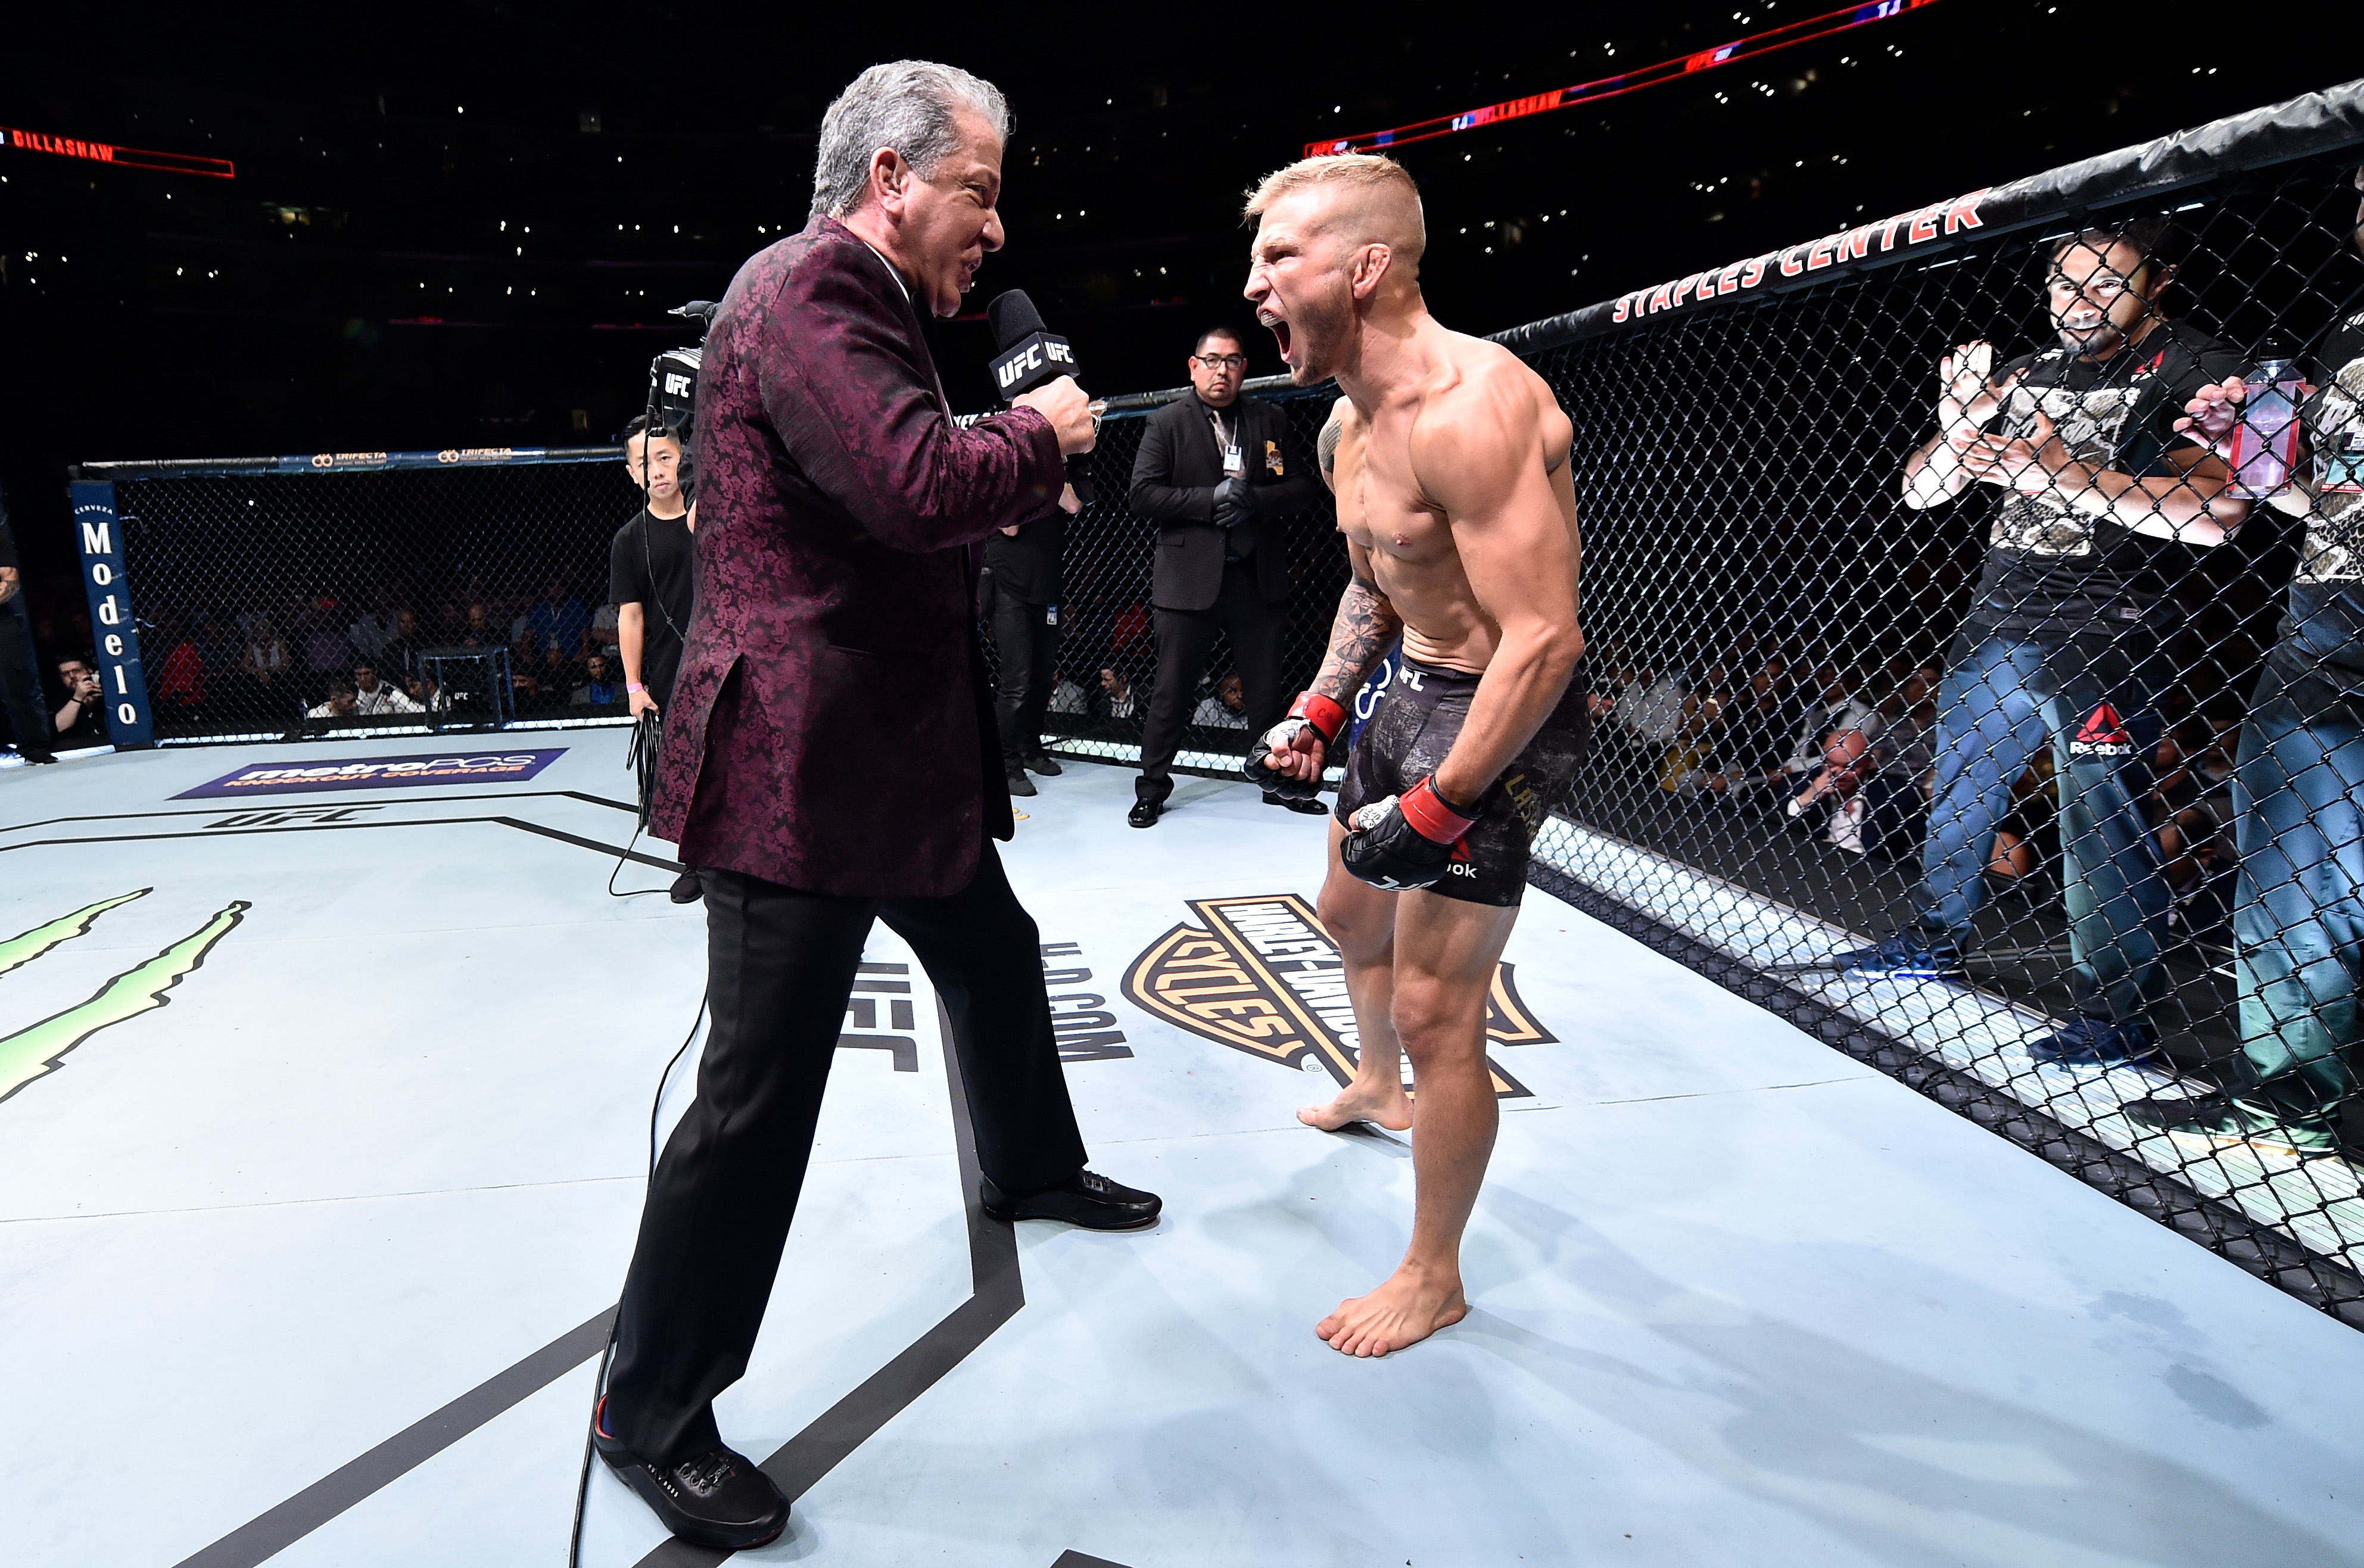 LOS ANGELES, CA - AUGUST 04: <a href='../fighter/TJ-Dillashaw'>TJ Dillashaw</a> is introduced by Bruce Buffer prior to his UFC bantamweight championship fight against <a href='../fighter/cody-garbrandt'>Cody Garbrandt</a> during the UFC 227 event inside Staples Center on August 4, 2018 in Los Angeles, California. (Photo by Jeff Bottari/Zuffa LLC/Zuffa LLC via Getty Images)“ align=“center“/></p><p>One champion successfully defended his title and a new king was crowned as UFC 227 unfolded on Saturday night from Los Angeles.</p><p>In the main event, TJ Dillashaw slammed the door on his longtime rivalry with former teammate Cody Garbrandt with a stunning first-round KO to hold on to his bantamweight title.</p><p>Both fighters were definitely gunning for the knockout, but it was Dillashaw who used pinpoint accuracy and a devastating counterstrike to put Garbrandt on wobbly legs midway through the opening round.</p><p>From there, Dillashaw just poured on the punishment as he unleashed a barrage of strikes that finally put Garbrandt down and out to end the fight.</p><p>Heading into Saturday night, the main event was as split down the middle as could be, with fantasy players giving a very slight advantage to Dillashaw, with 53 percent favoring him to win. Another 64 percent predicted he would win by knockout, and ultimately all the players who chose Dillashaw earned an extra 150-point bonus because it was a title fight.</p><p><iframe src=